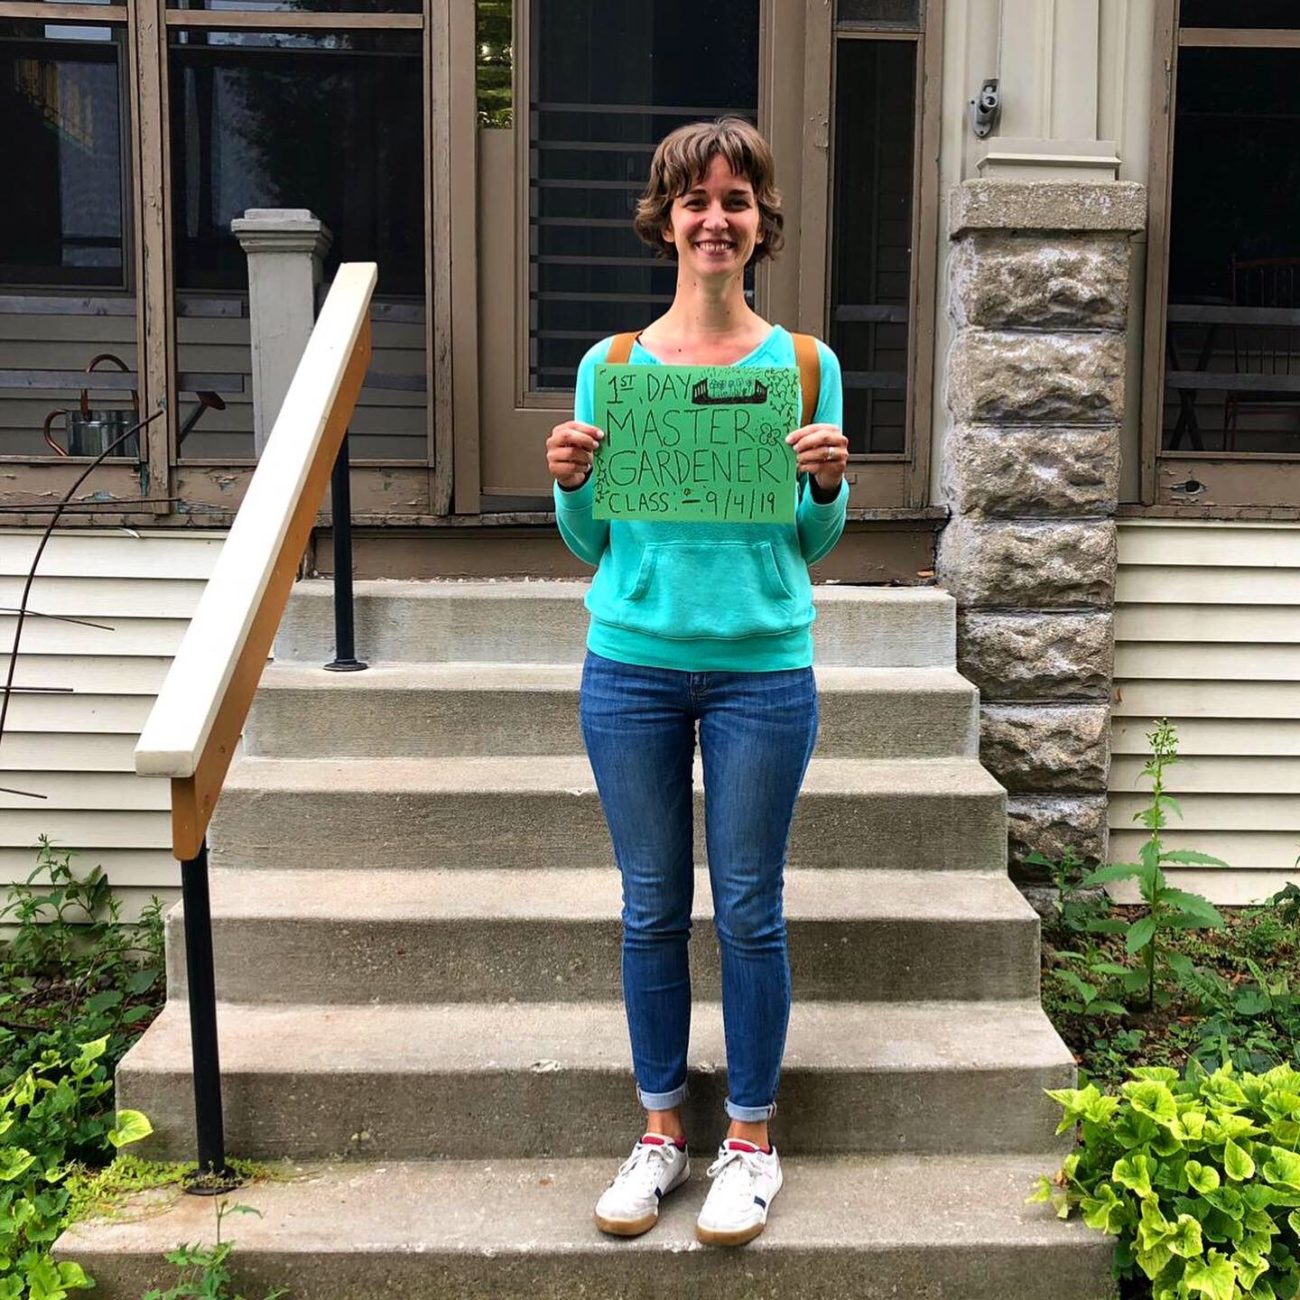 Mandi standing on her front porch with her backpack on. She's holding a sign that reads "1st Day Master Gardener Class - 9/4/19".